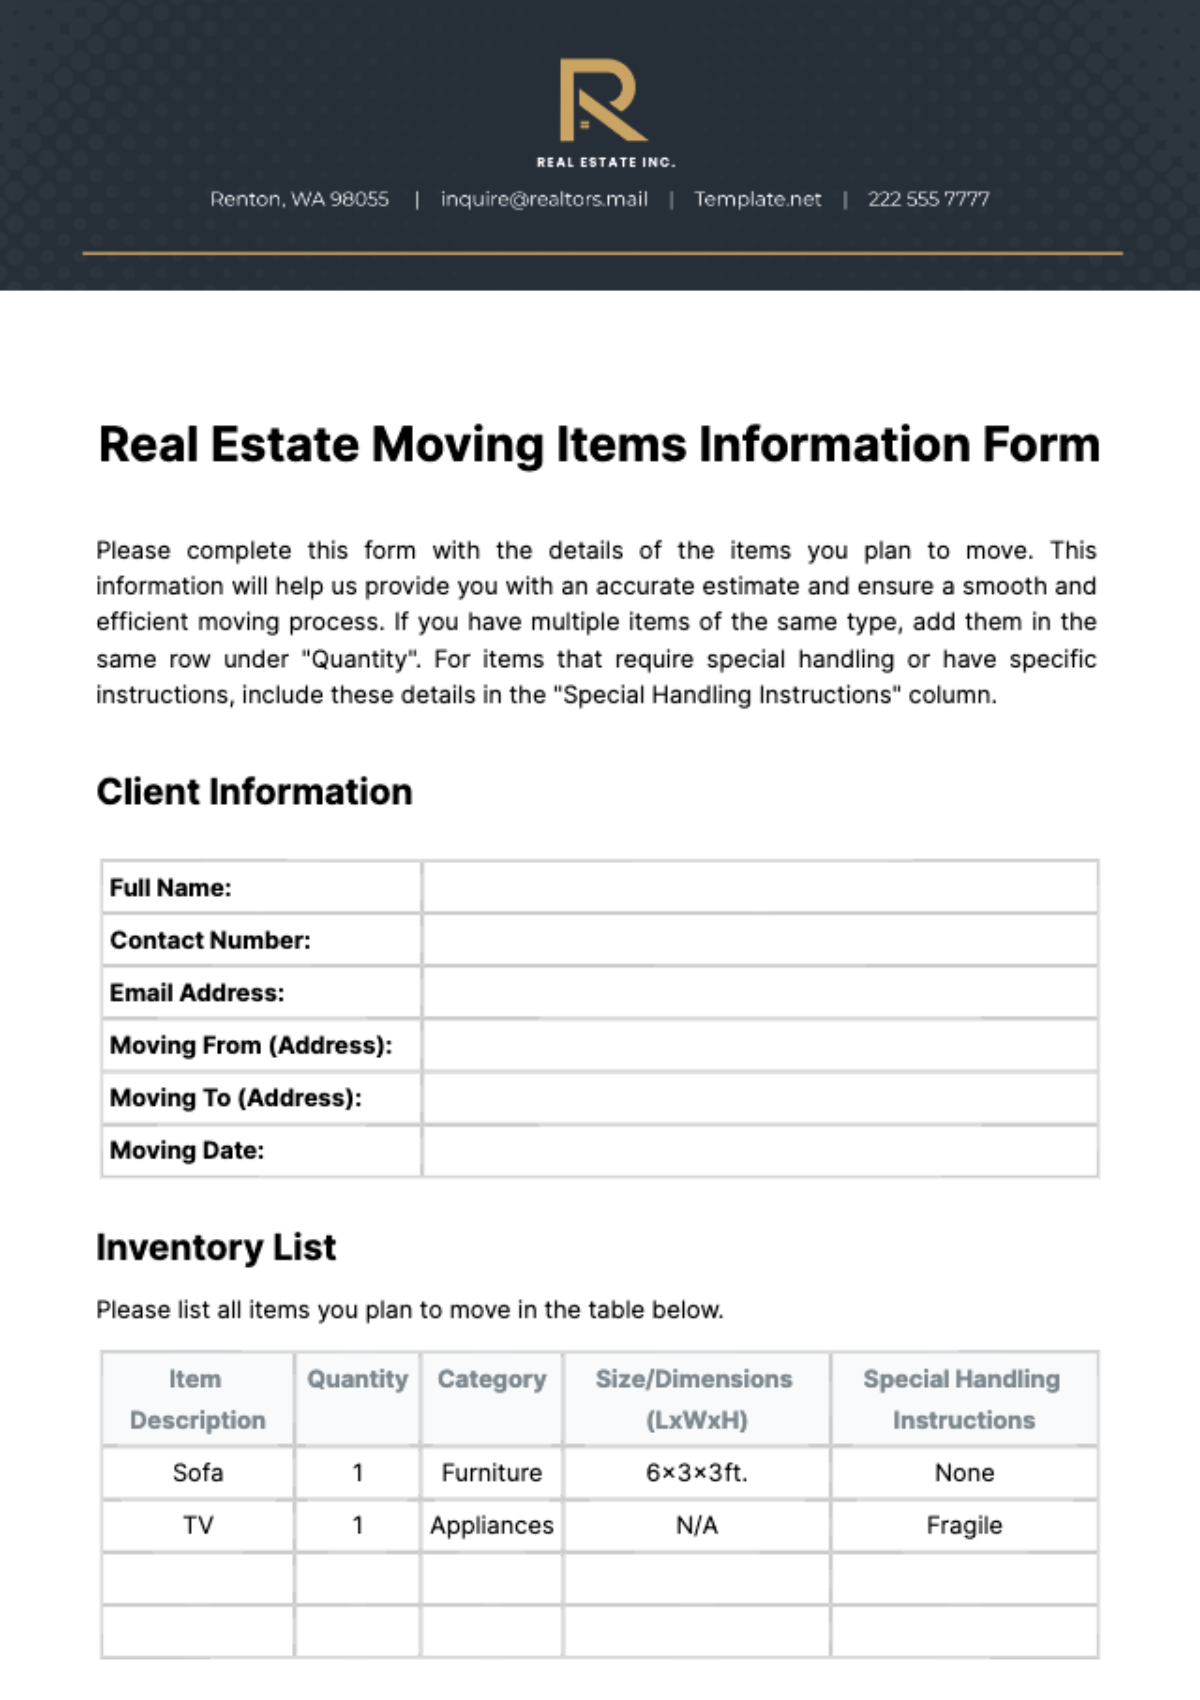 Real Estate Moving Items Information Form Template